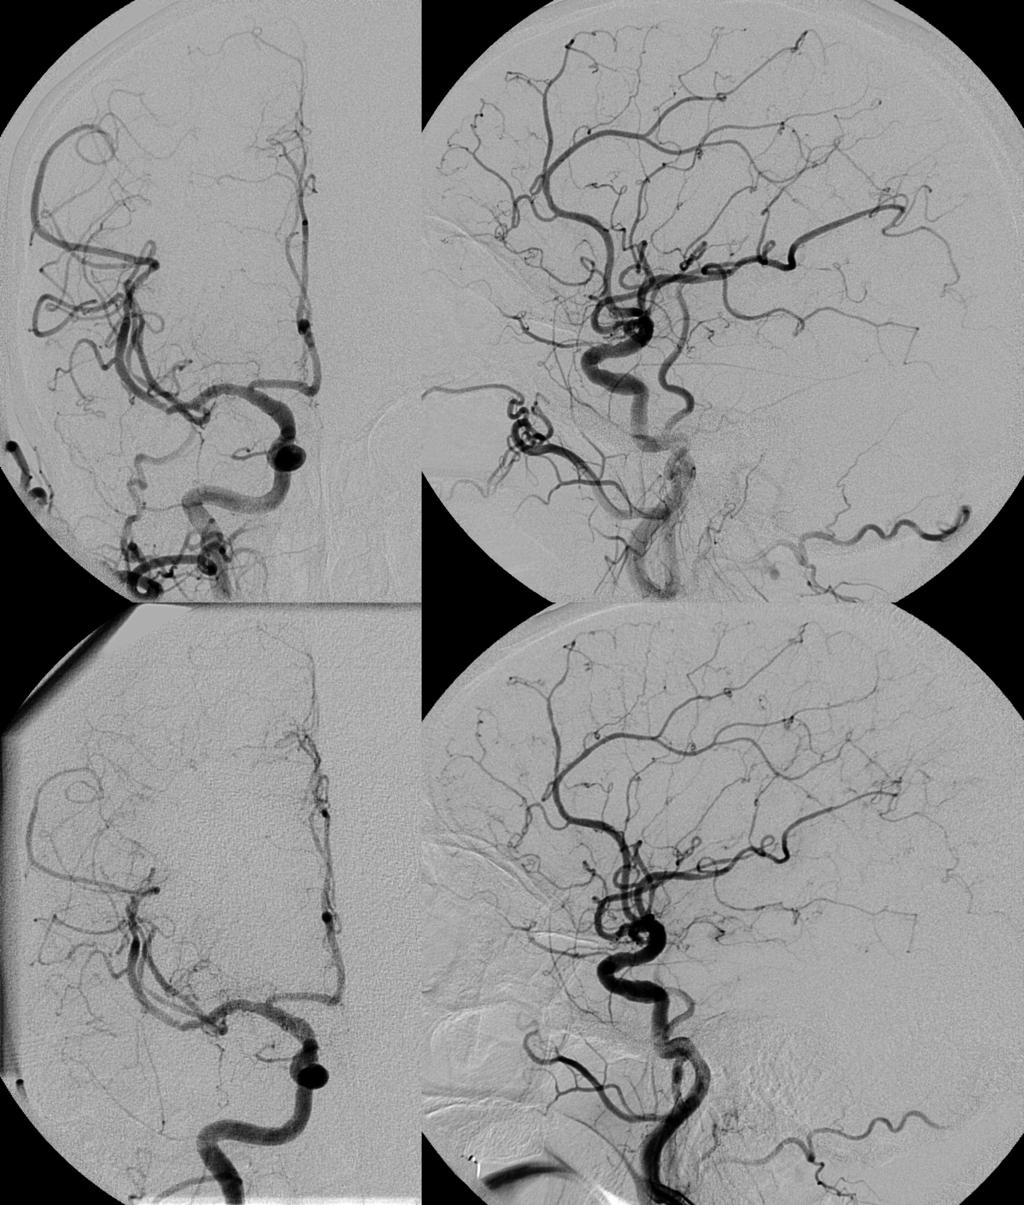 C D Fig. 3 Ａ Ｂ The postprocedural right carotid angiograms show absence of stenosis or filling defects in the intracranial arteries.